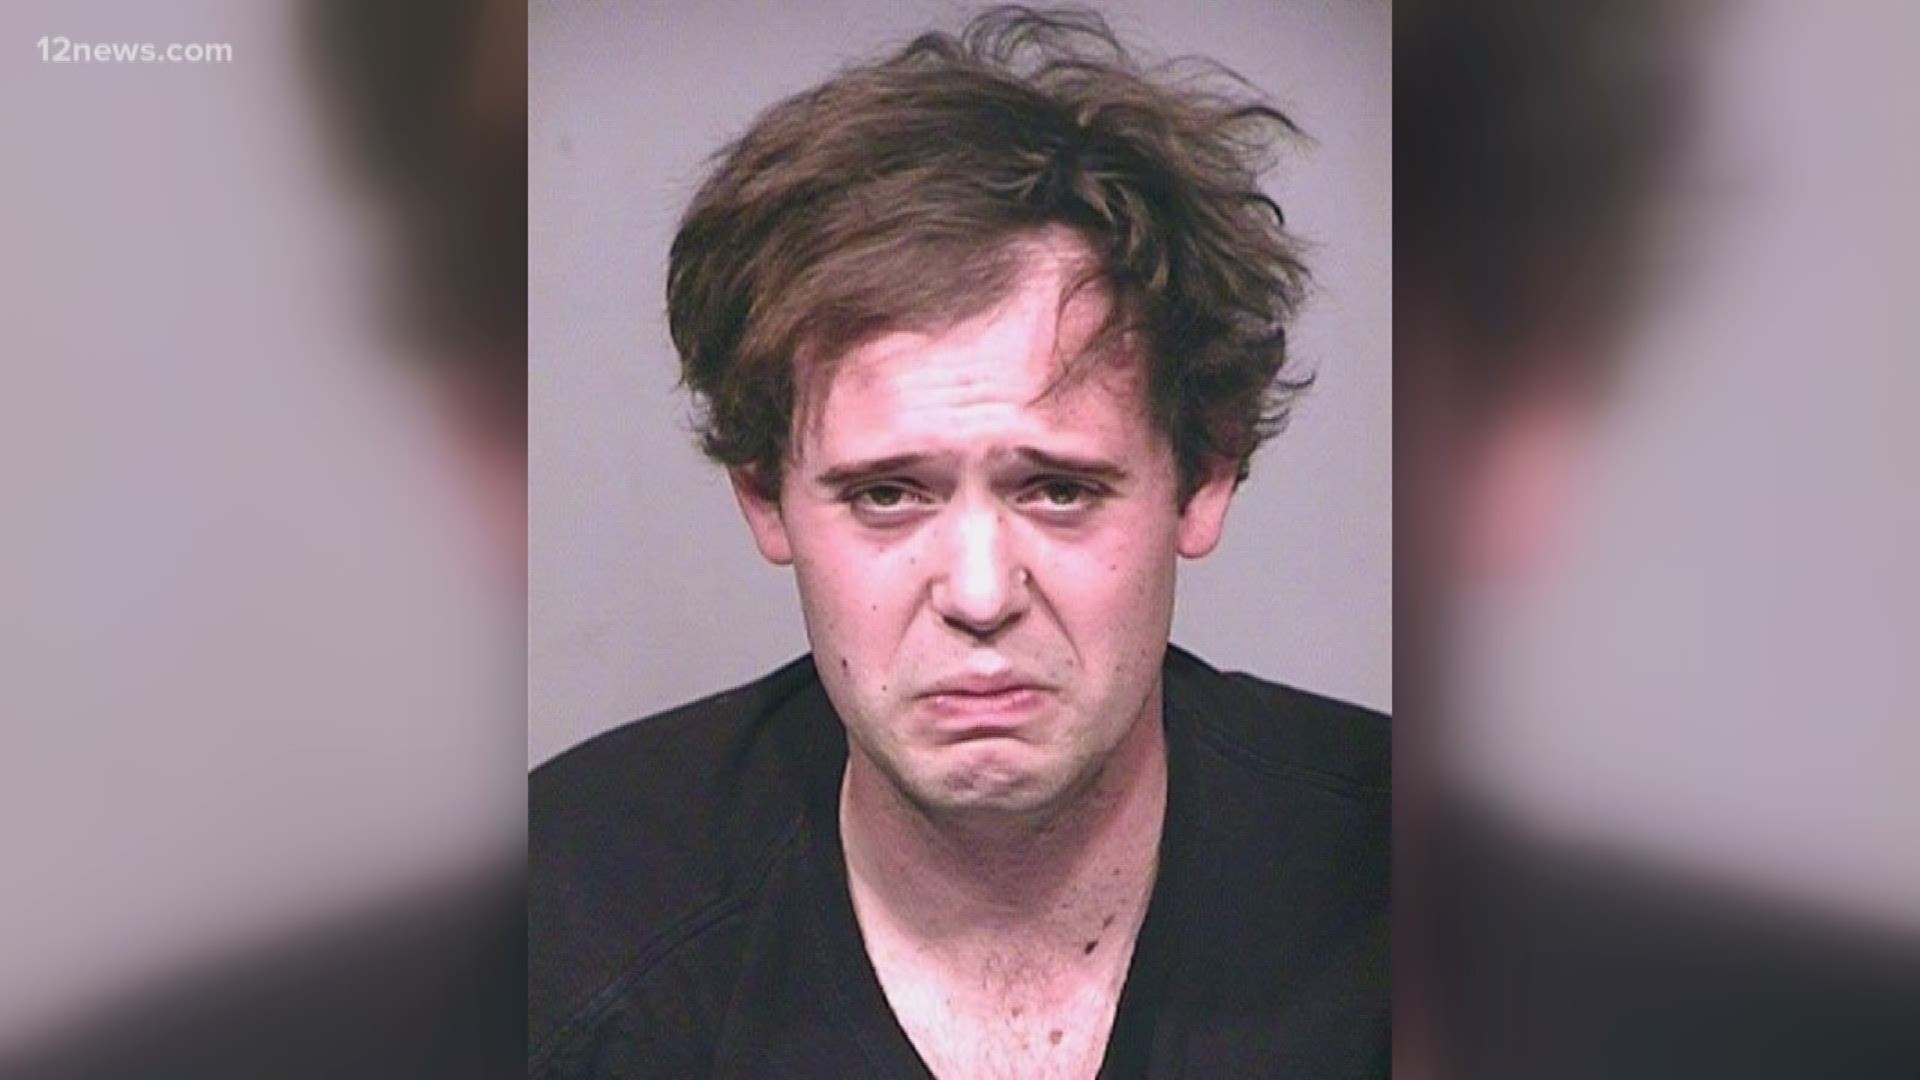 Jacob Bushkin has been charged by Scottsdale PD for allegedly stabbing his service dog, Cub, over 100 times. According to police, Bushkin's parents took the dog to a local vet where staff called the local humane society and police.